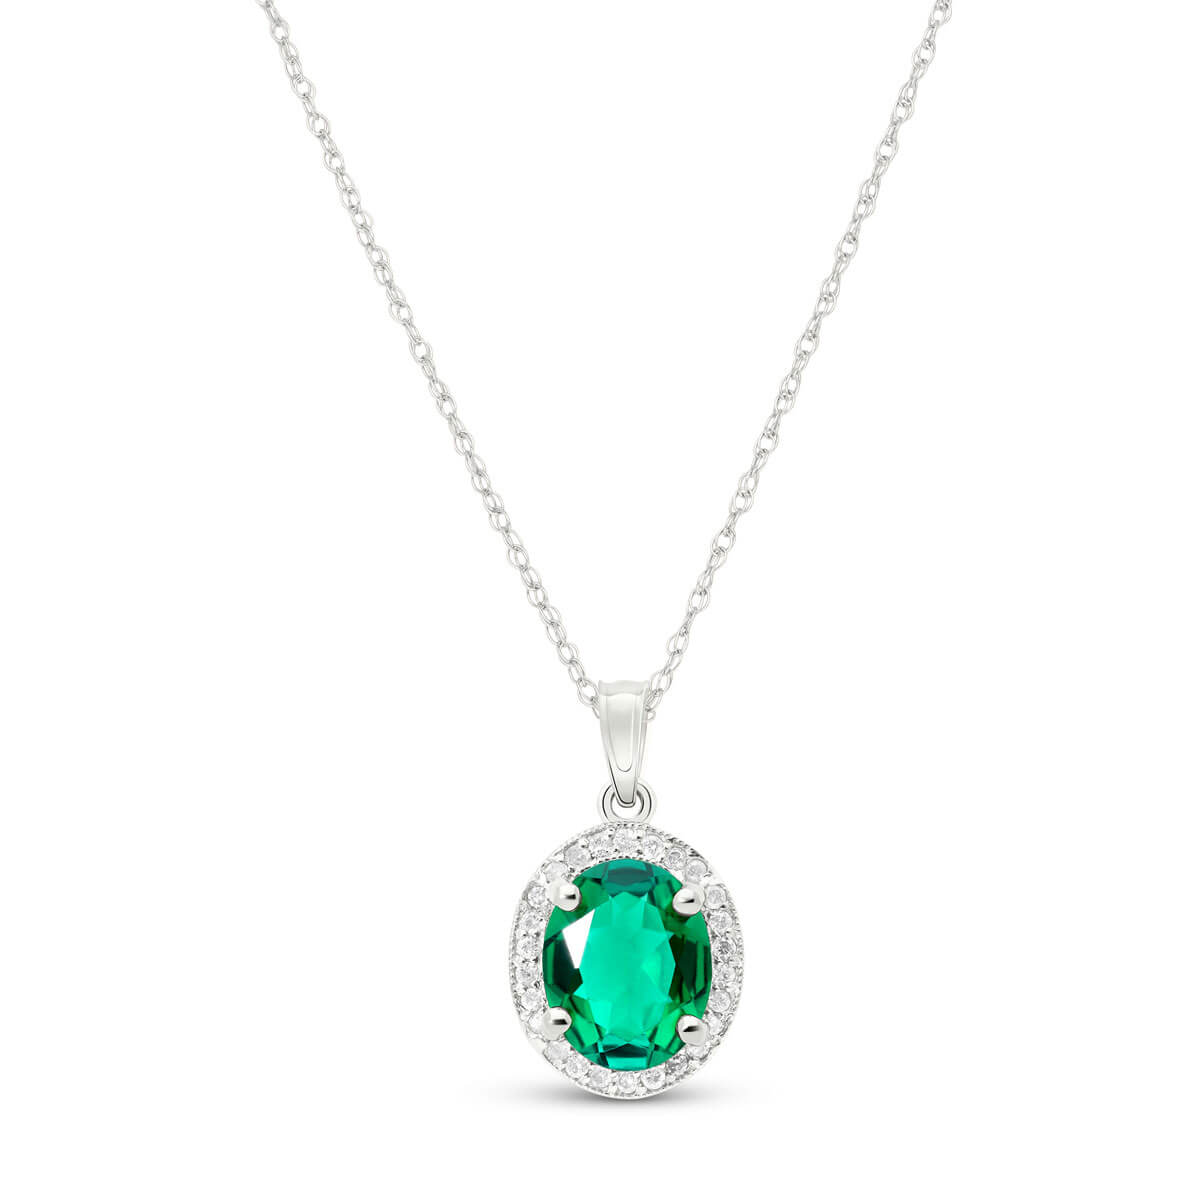 Lab Grown Emerald & Diamond Halo Pendant Necklace 2.04 ctw in 9ct White Gold